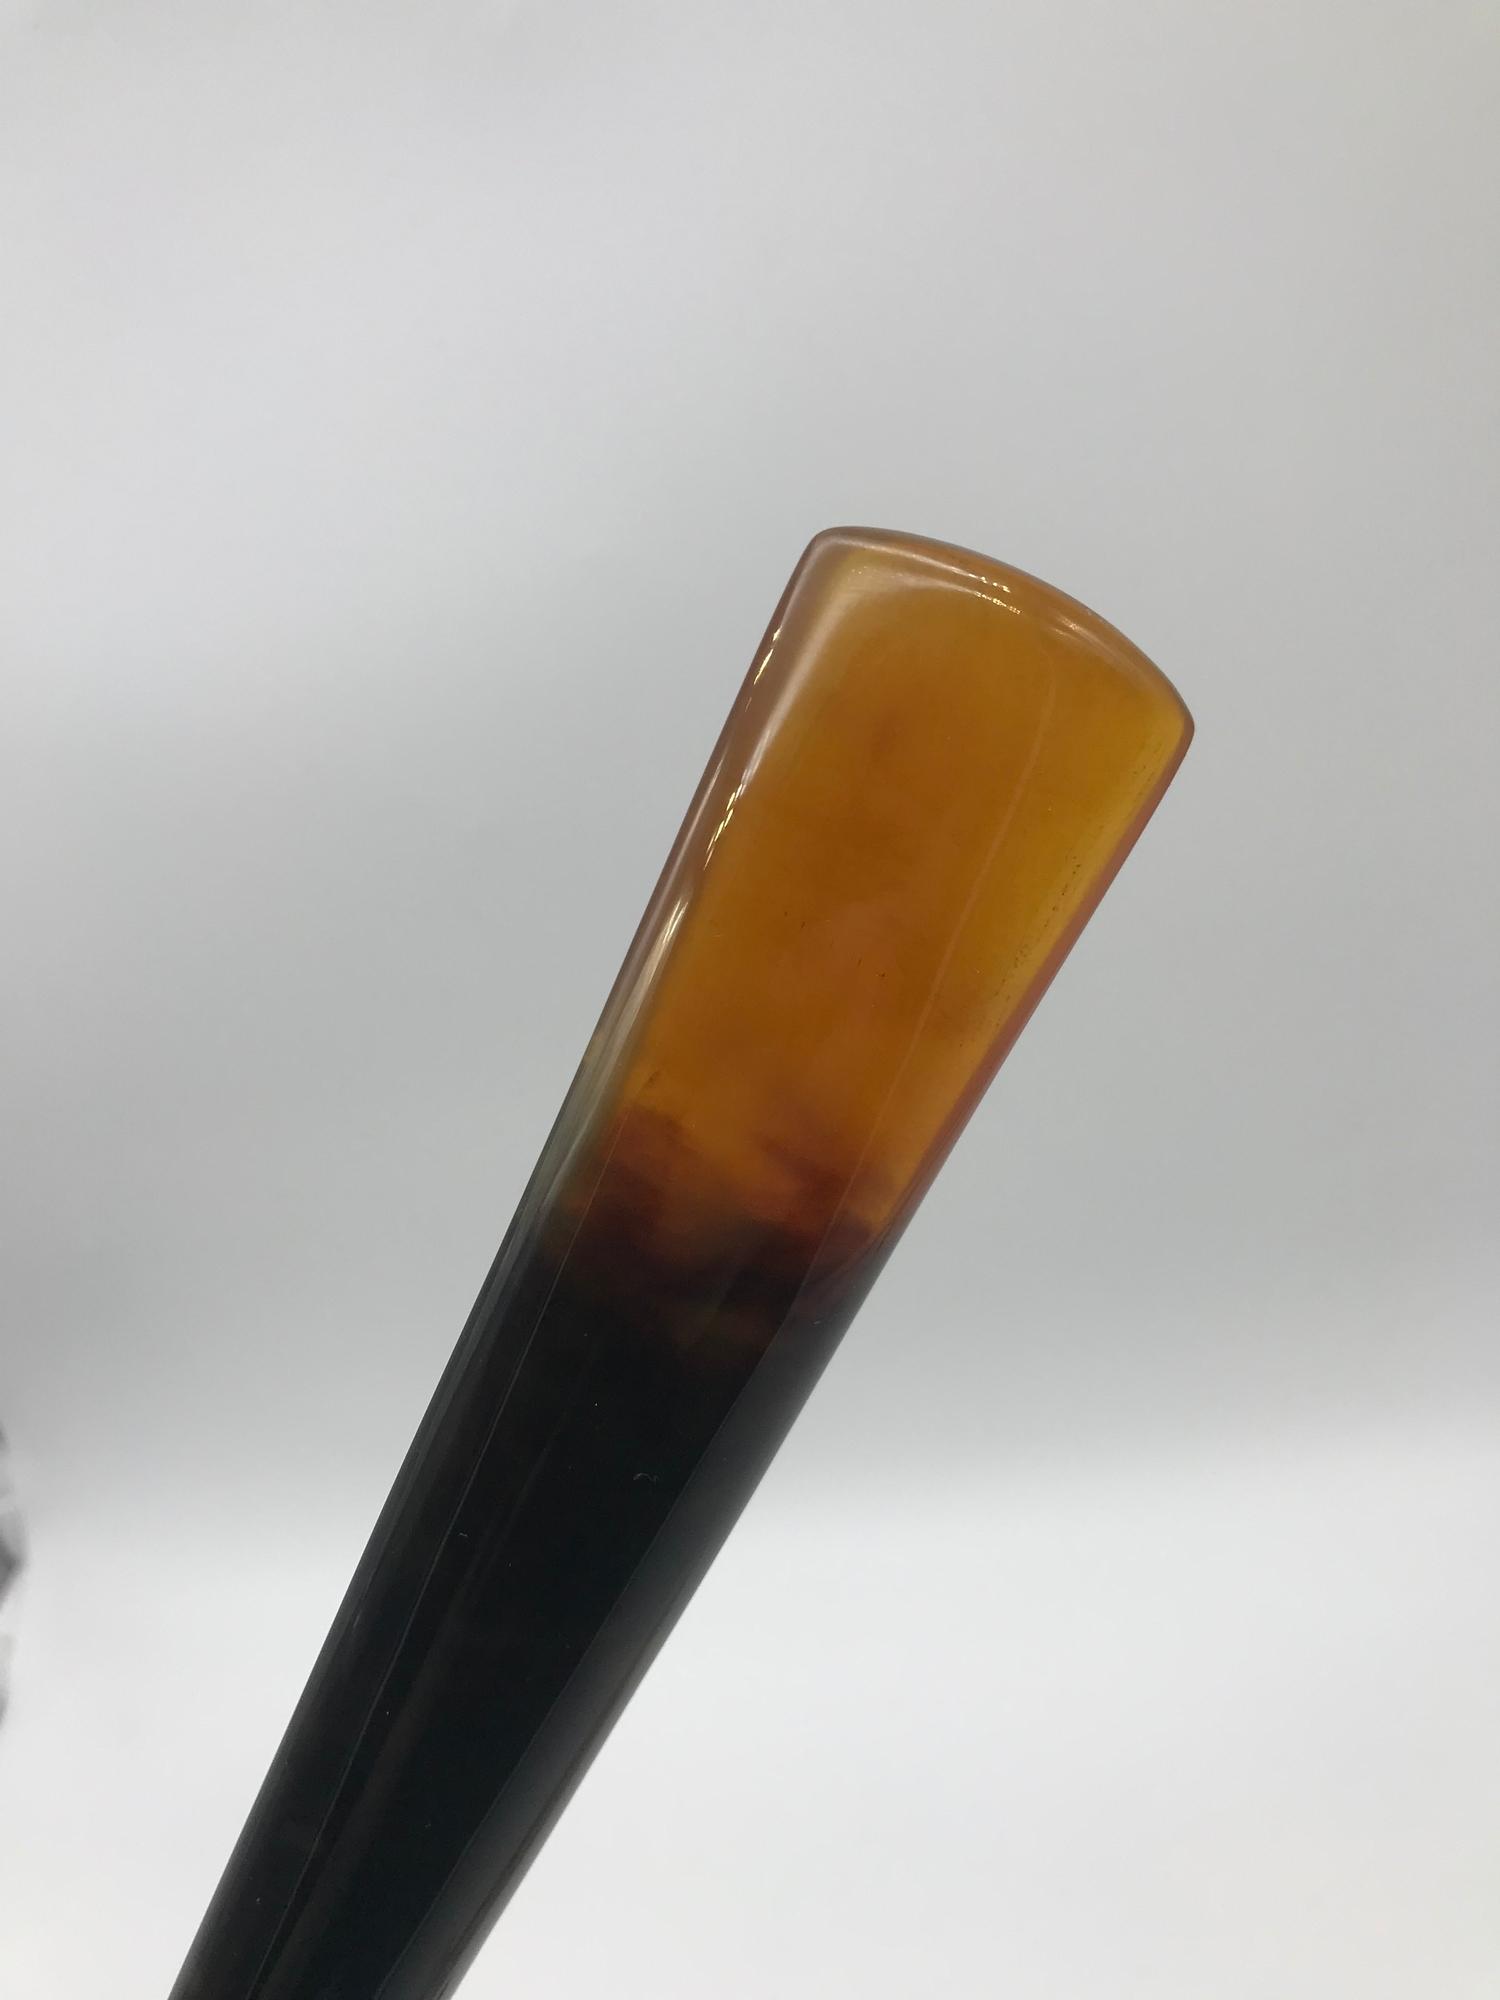 An 19th century Tortoise shell umbrella handle & end. Handle measures 30.2cm in length without - Image 2 of 3